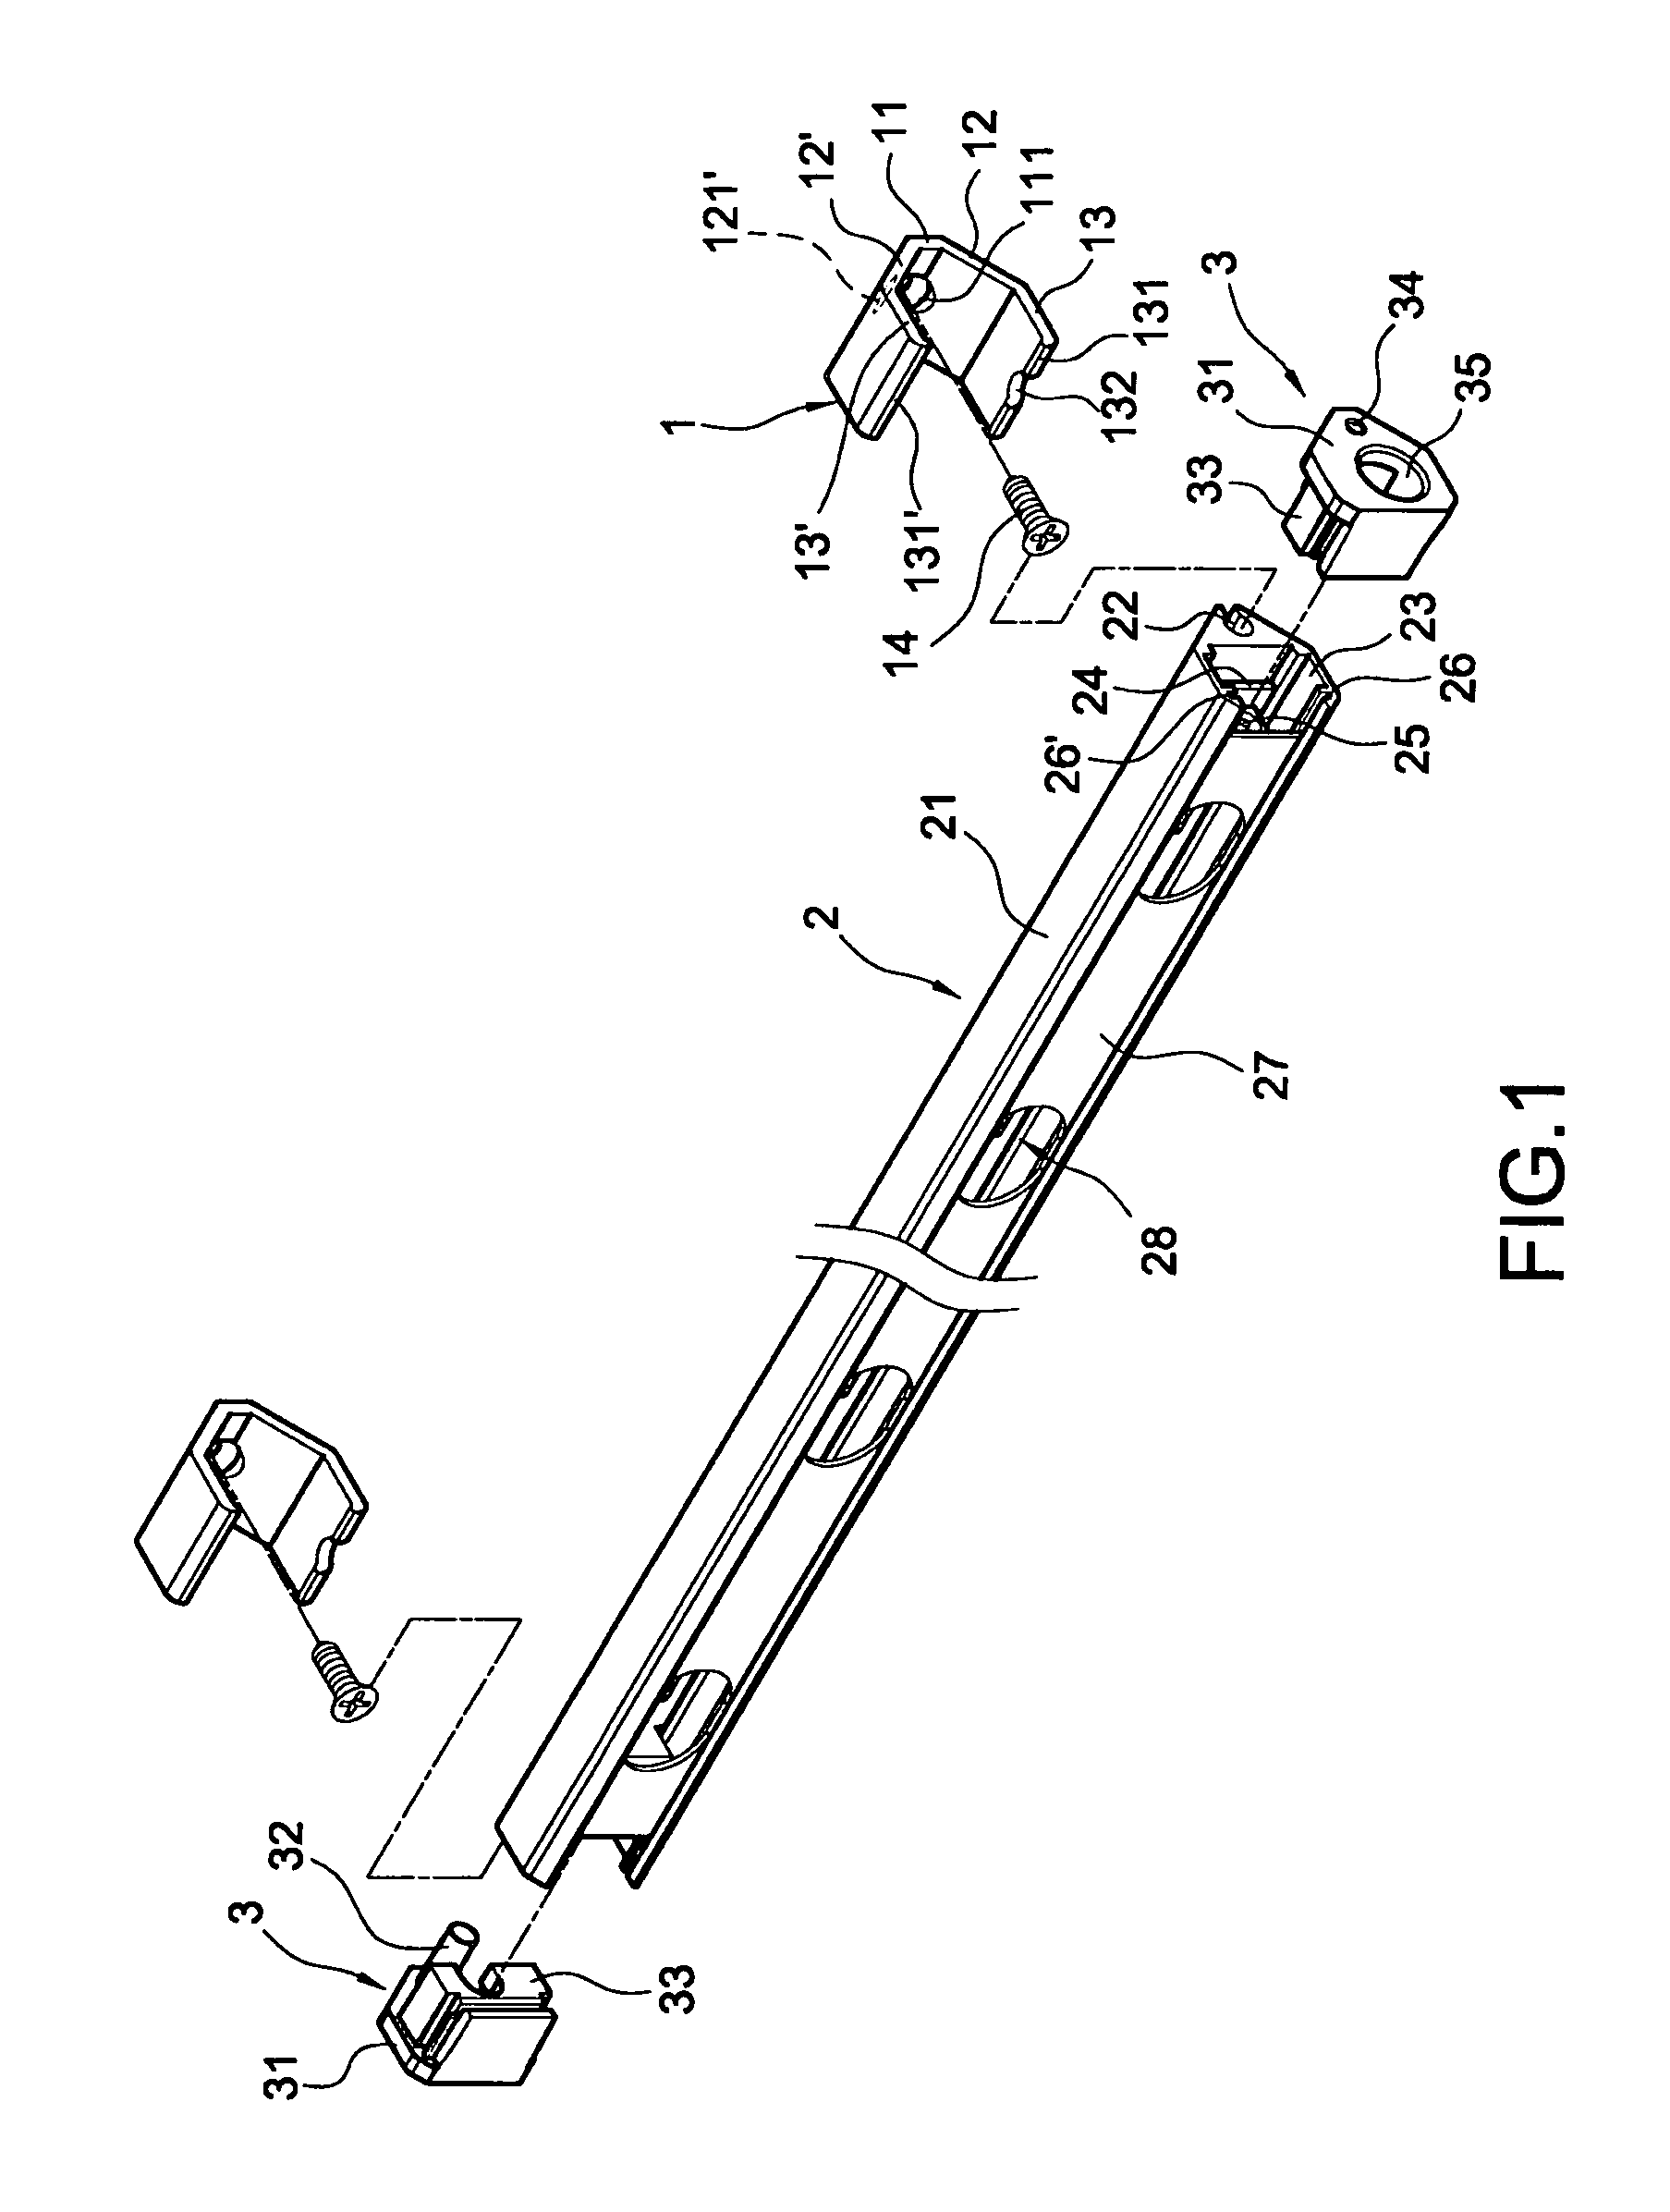 Assembly for fixing and connecting light bar lamp